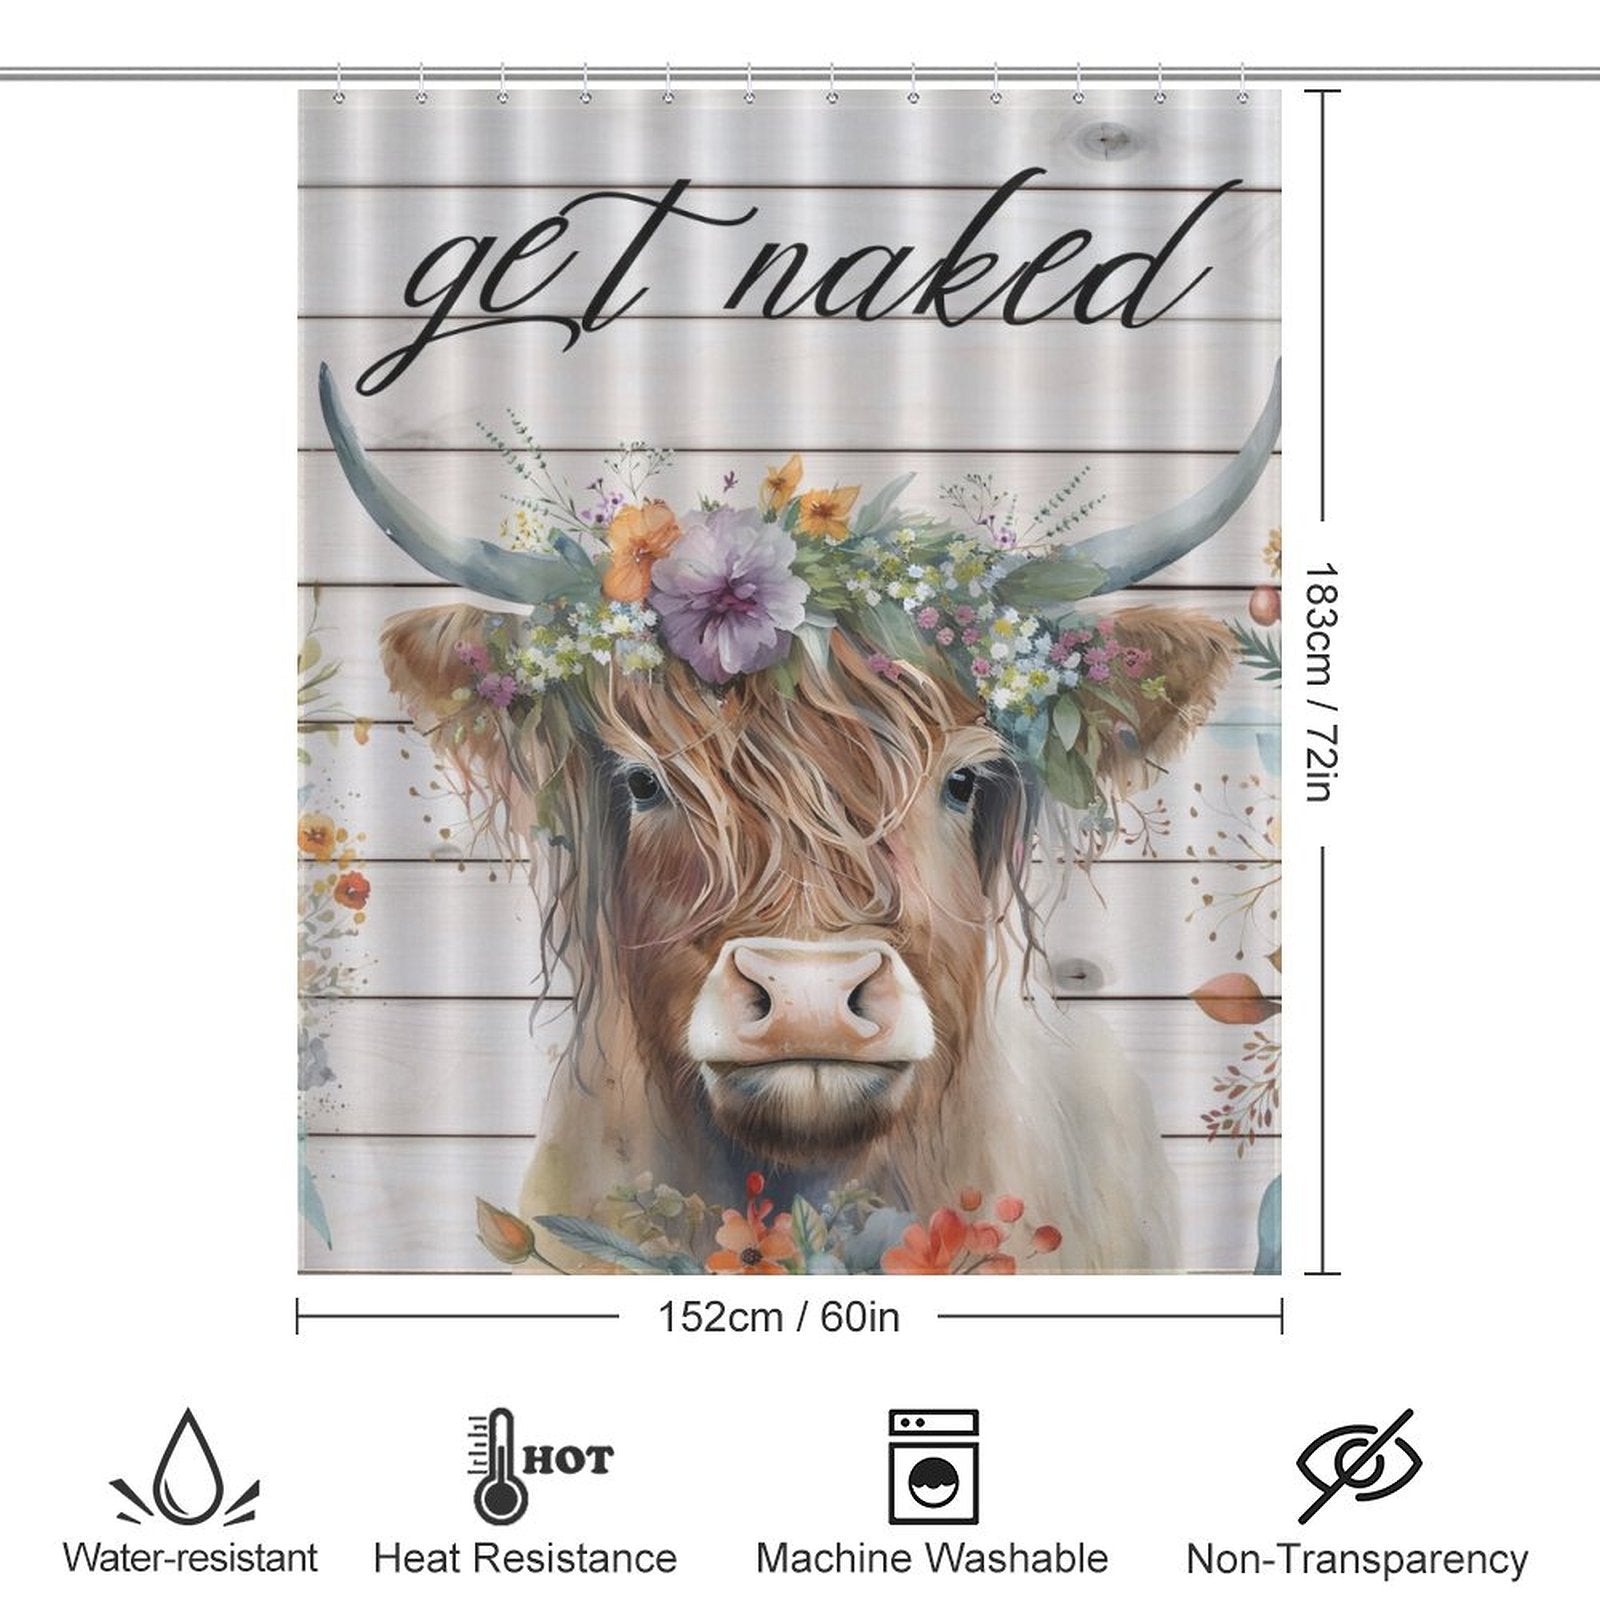 This Funny Letters Get Naked Flower Highland Cow Shower Curtain-Cottoncat, adorned with a whimsical flower crown and the playful text "get naked," makes for perfect bathroom decor. Measuring 183 cm by 152 cm, it's water-resistant and machine washable.